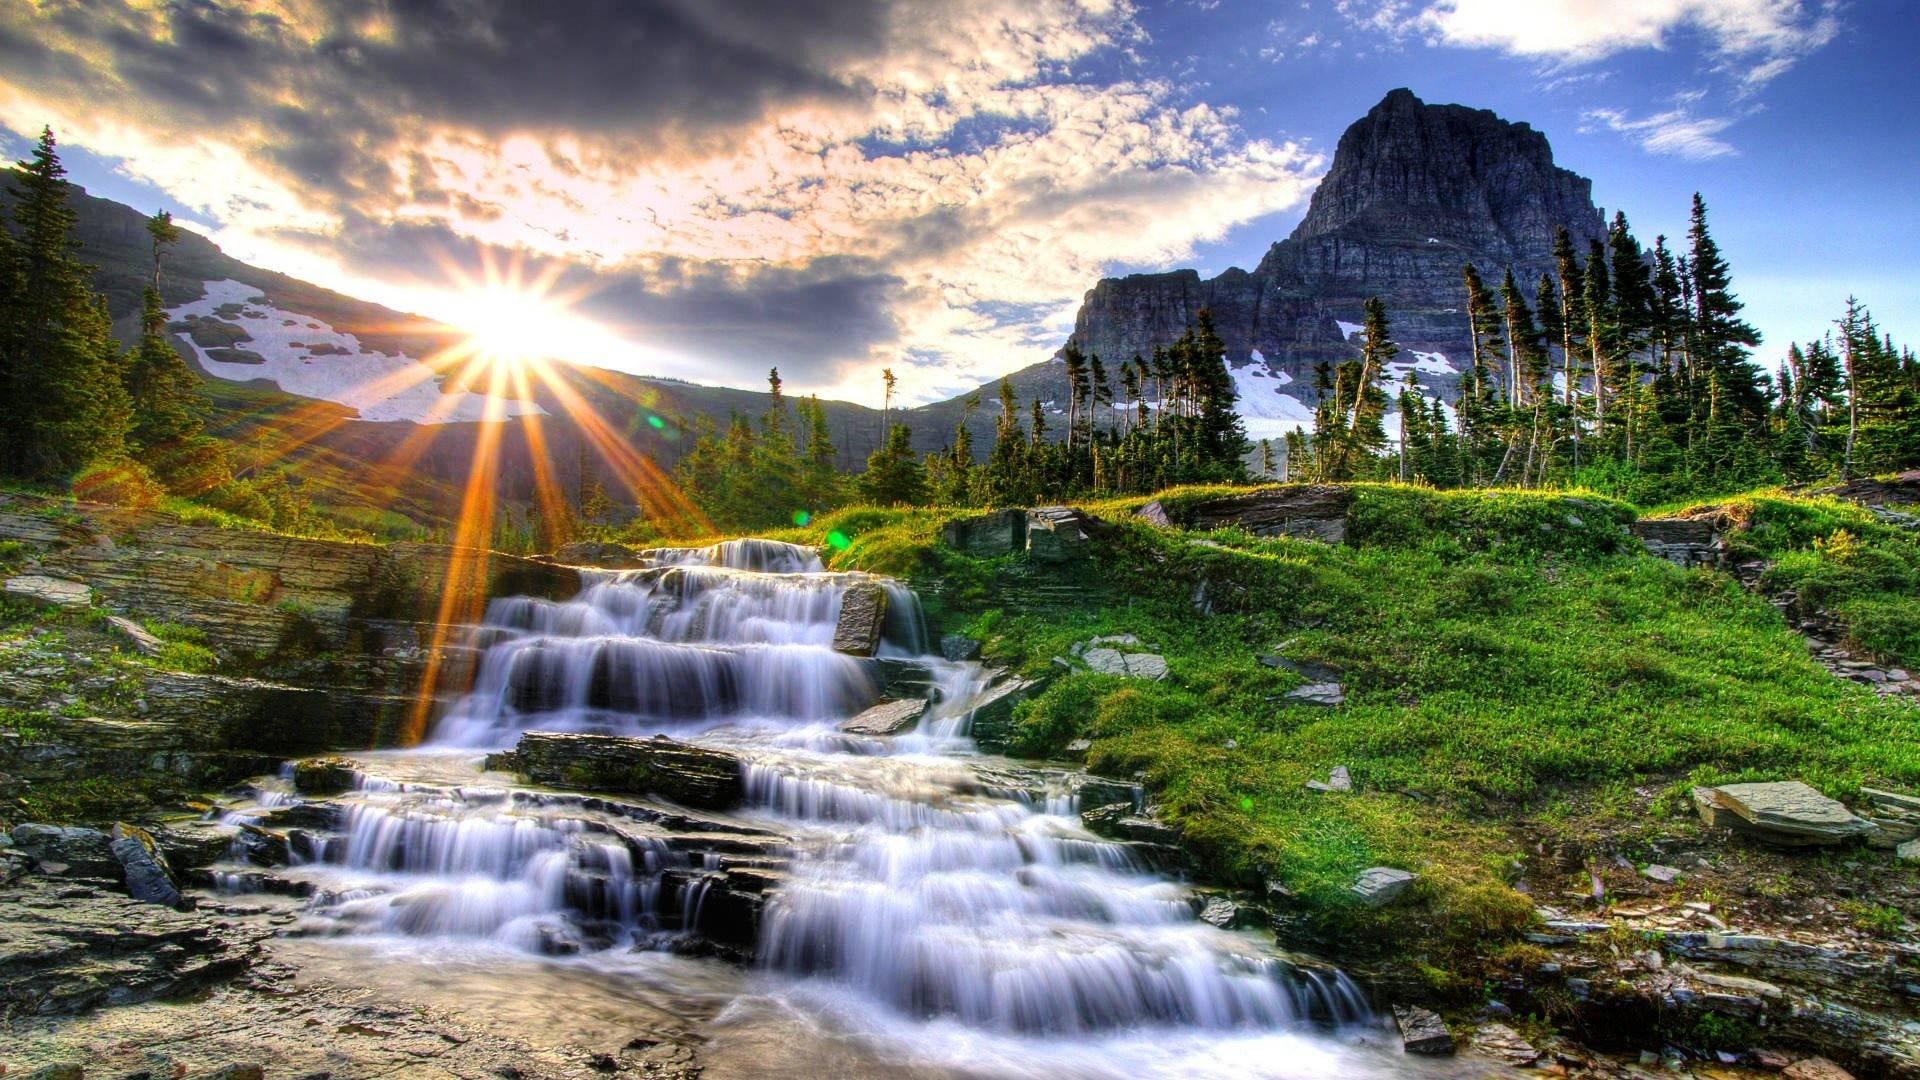 1920 x 1080 · jpeg - Download Awesome Nature Wallpapers in Full HD